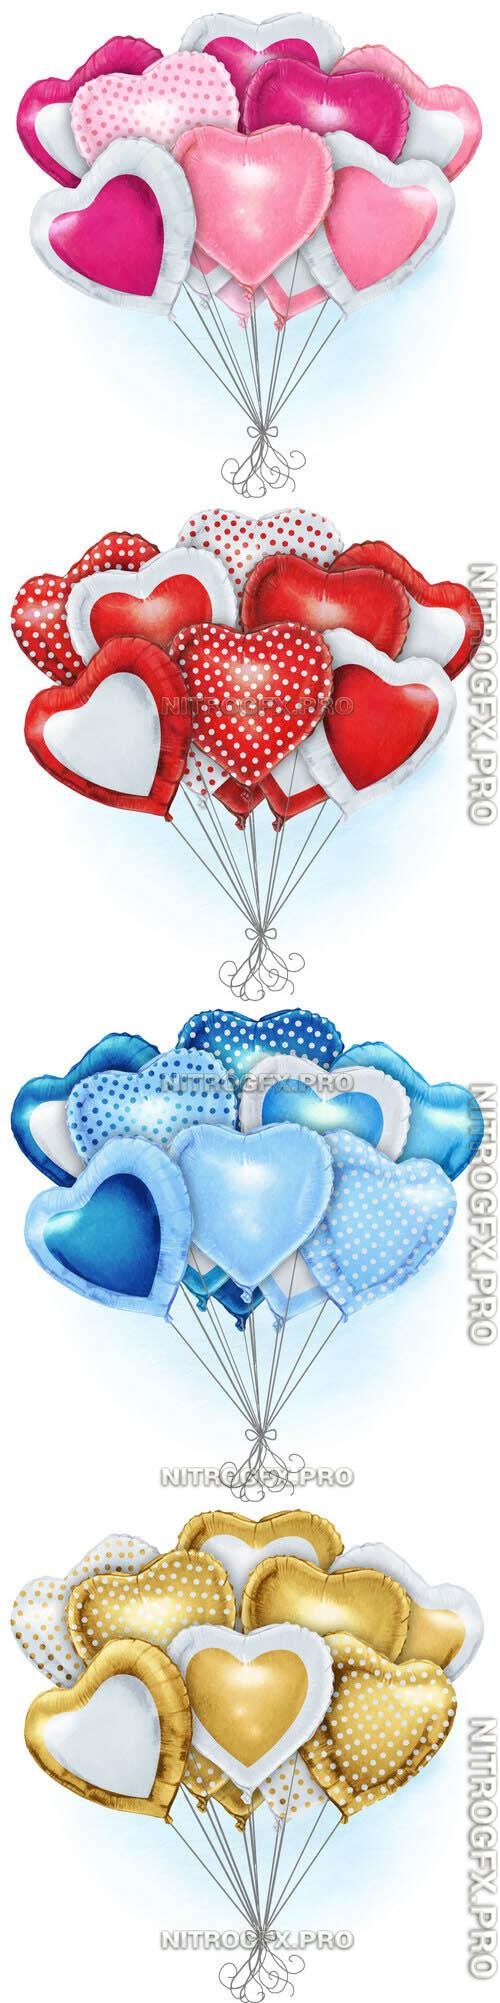 Hand drawn heart shaped realistic ballooons - Watercolor vector clipart